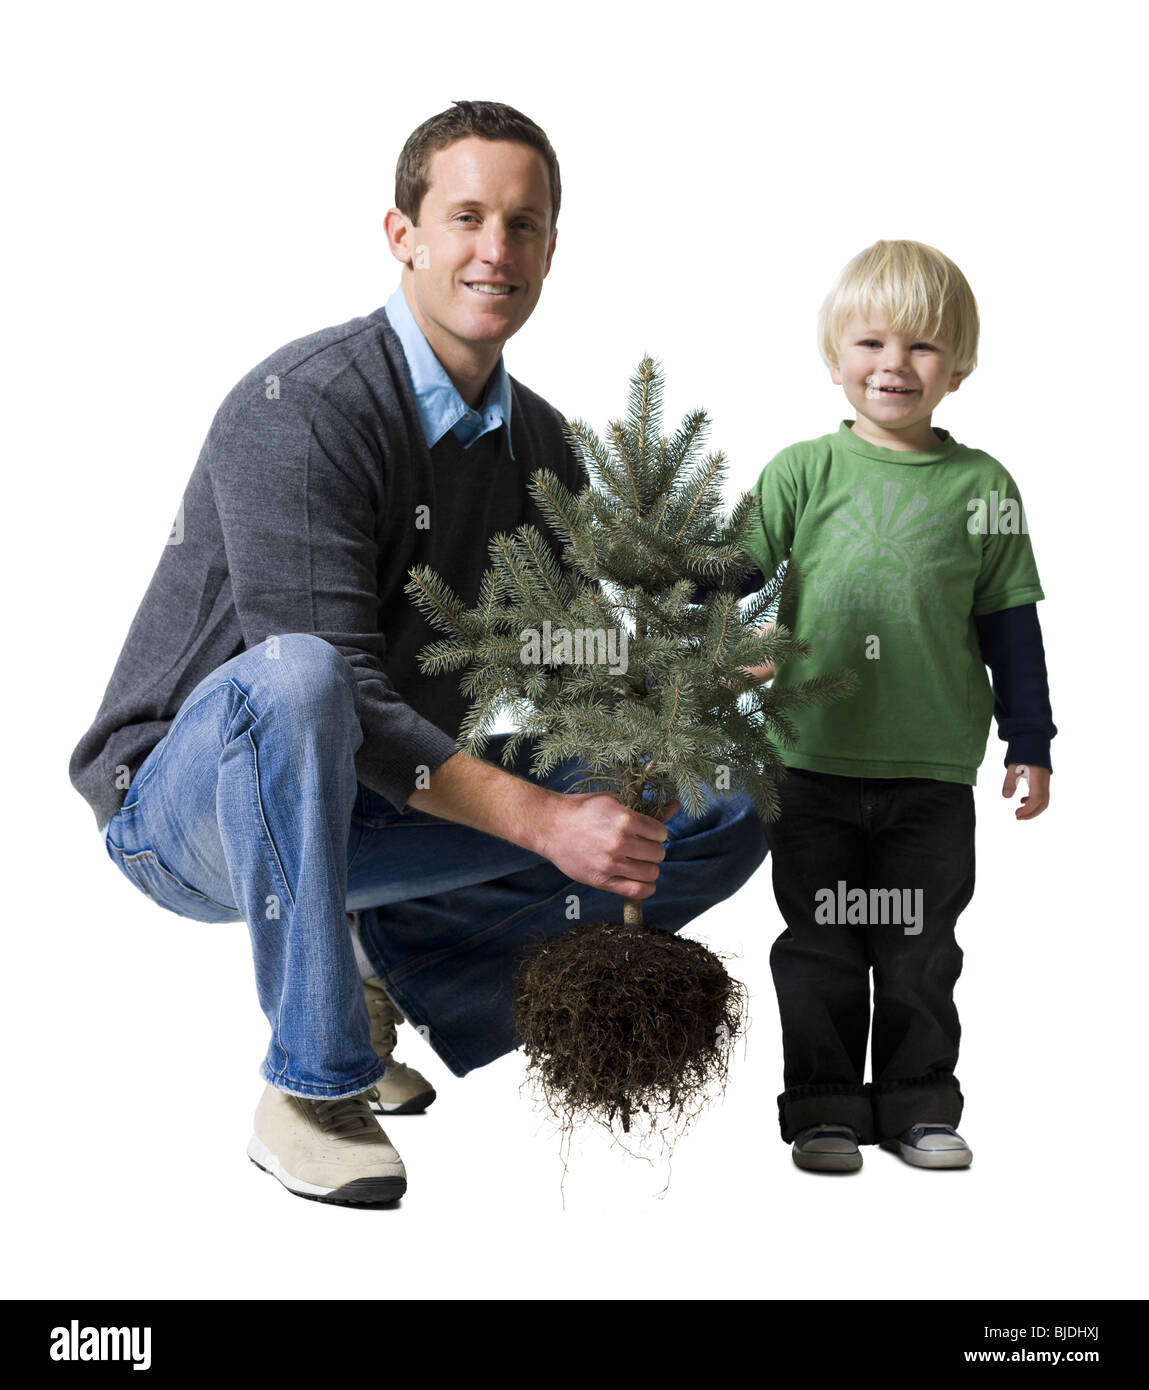 father and son with a tree Stock Photo